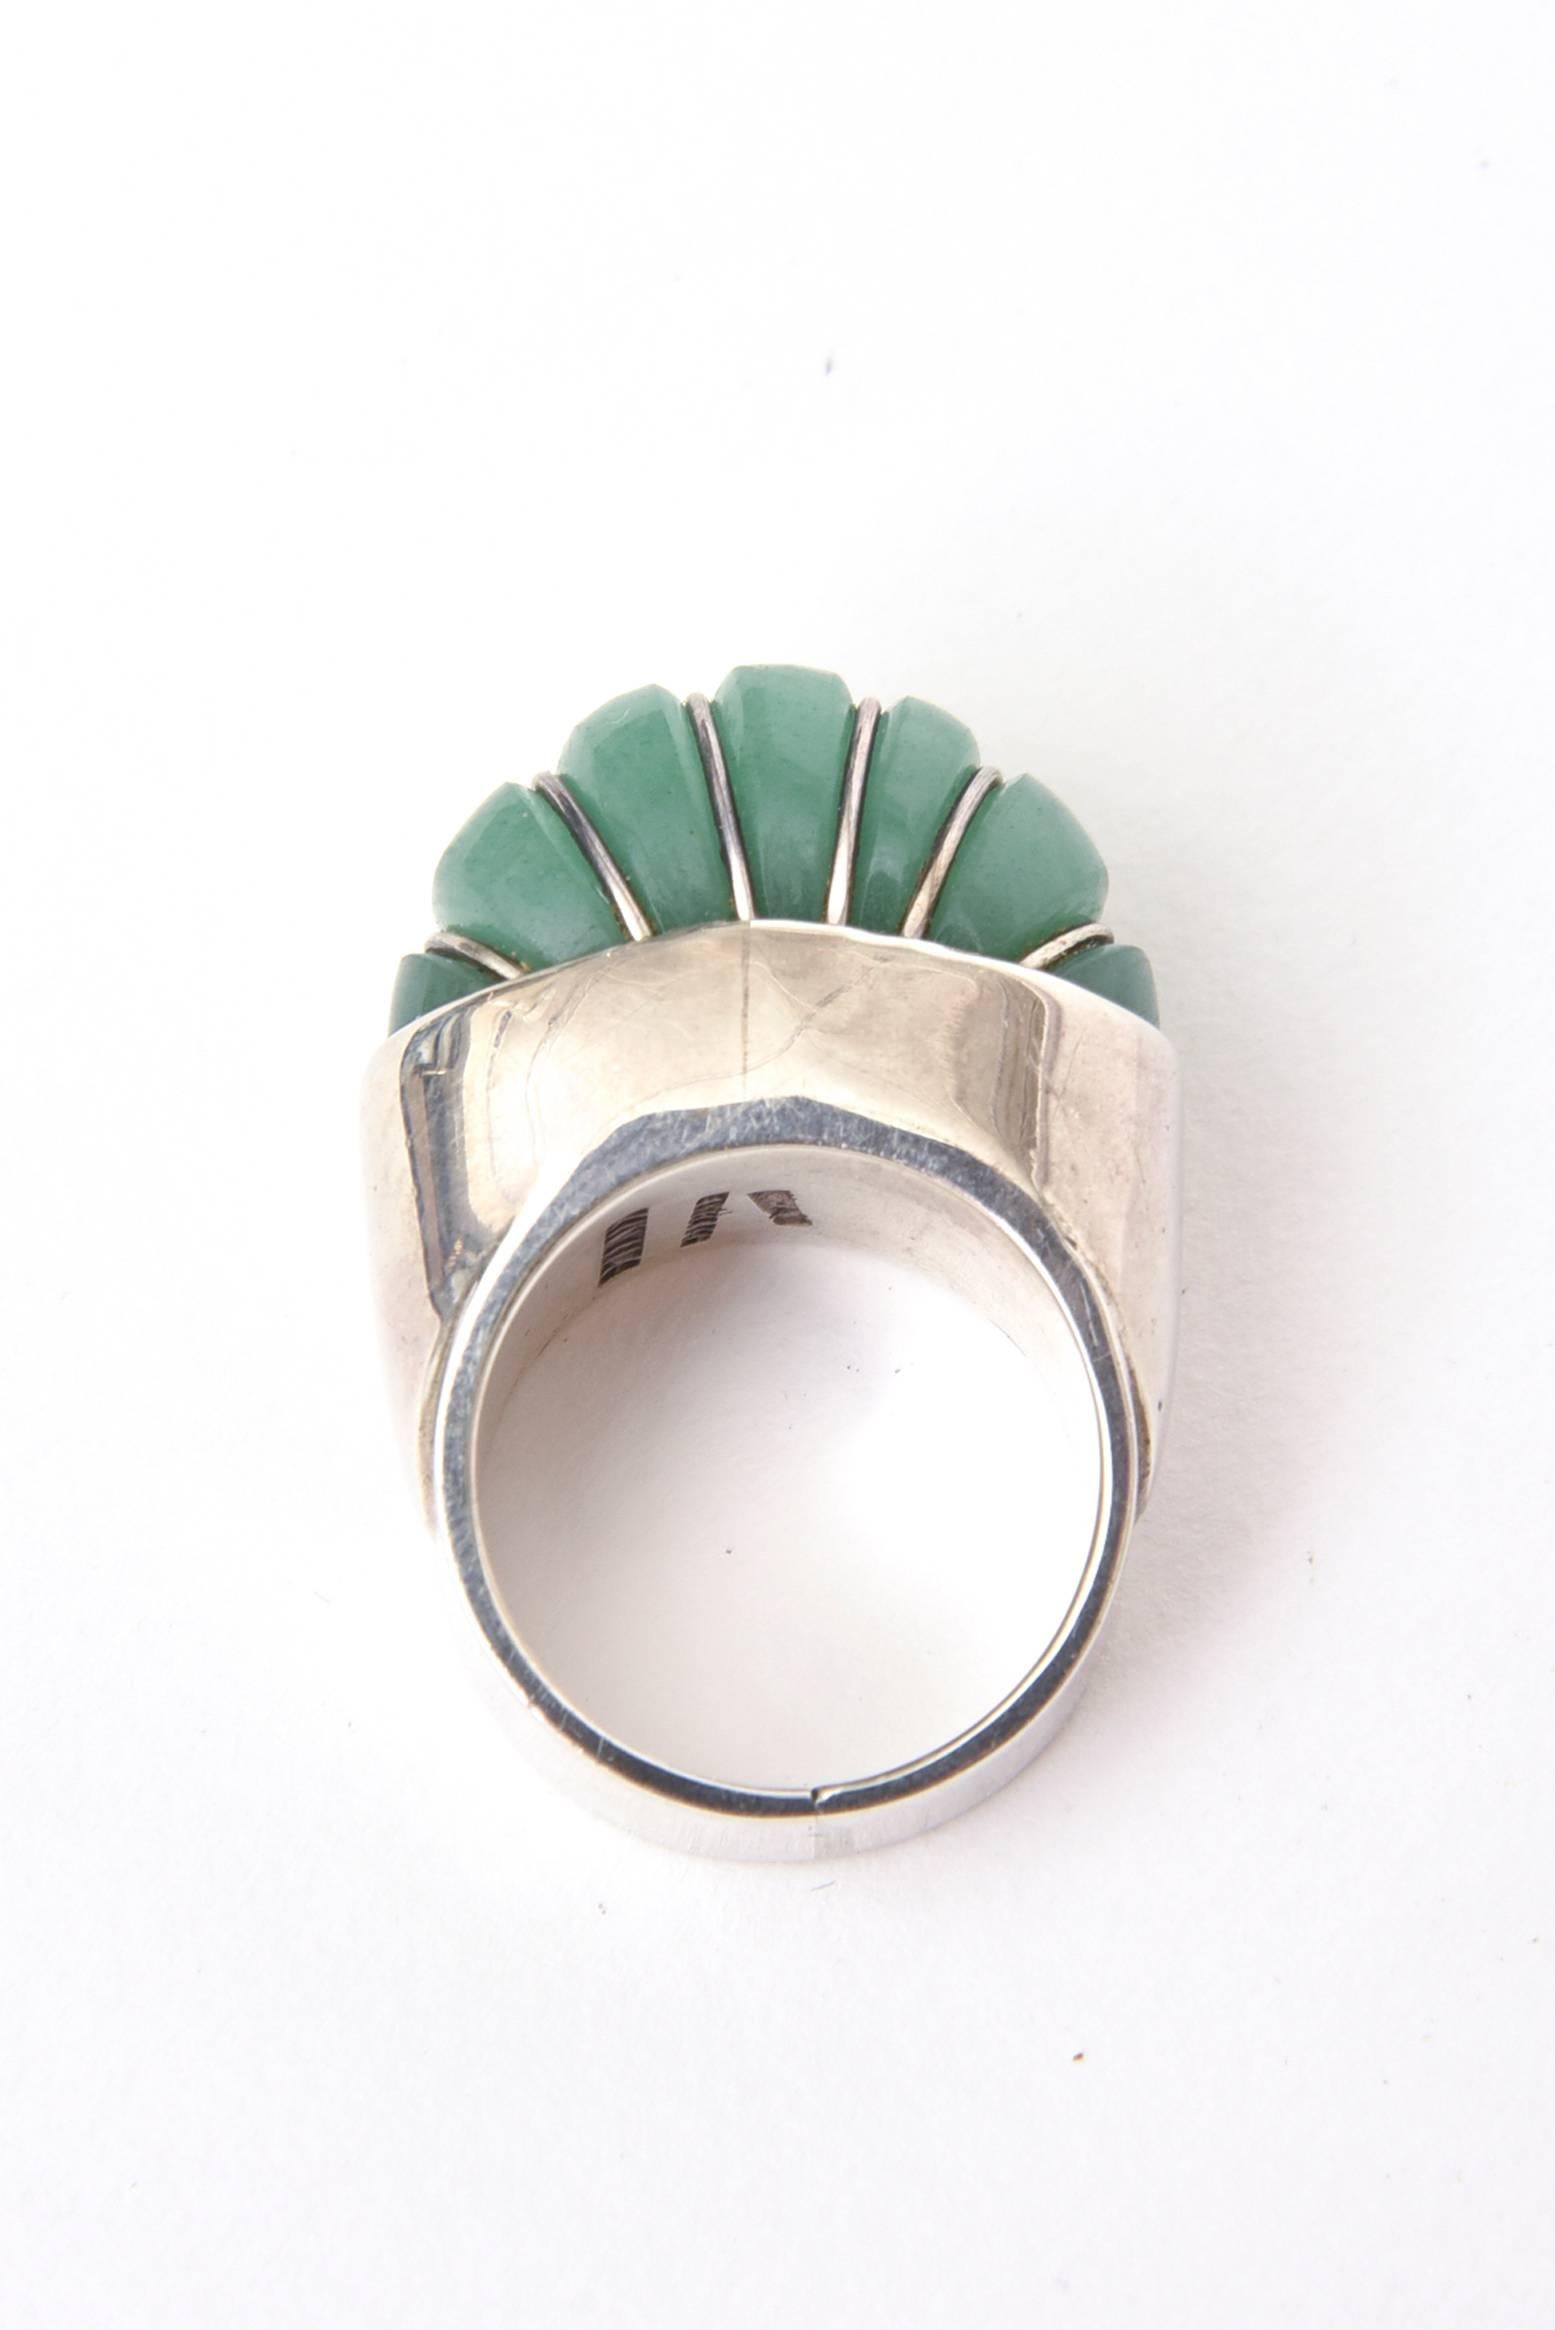 Unique petals of Jade on this ring sit high against the Sterling Silver. 
It is sculptural and dimensional.
The ring has height on your finger and sits high.
The ring size is 8.25. It can always be sized to your specifications at your end.
It is all